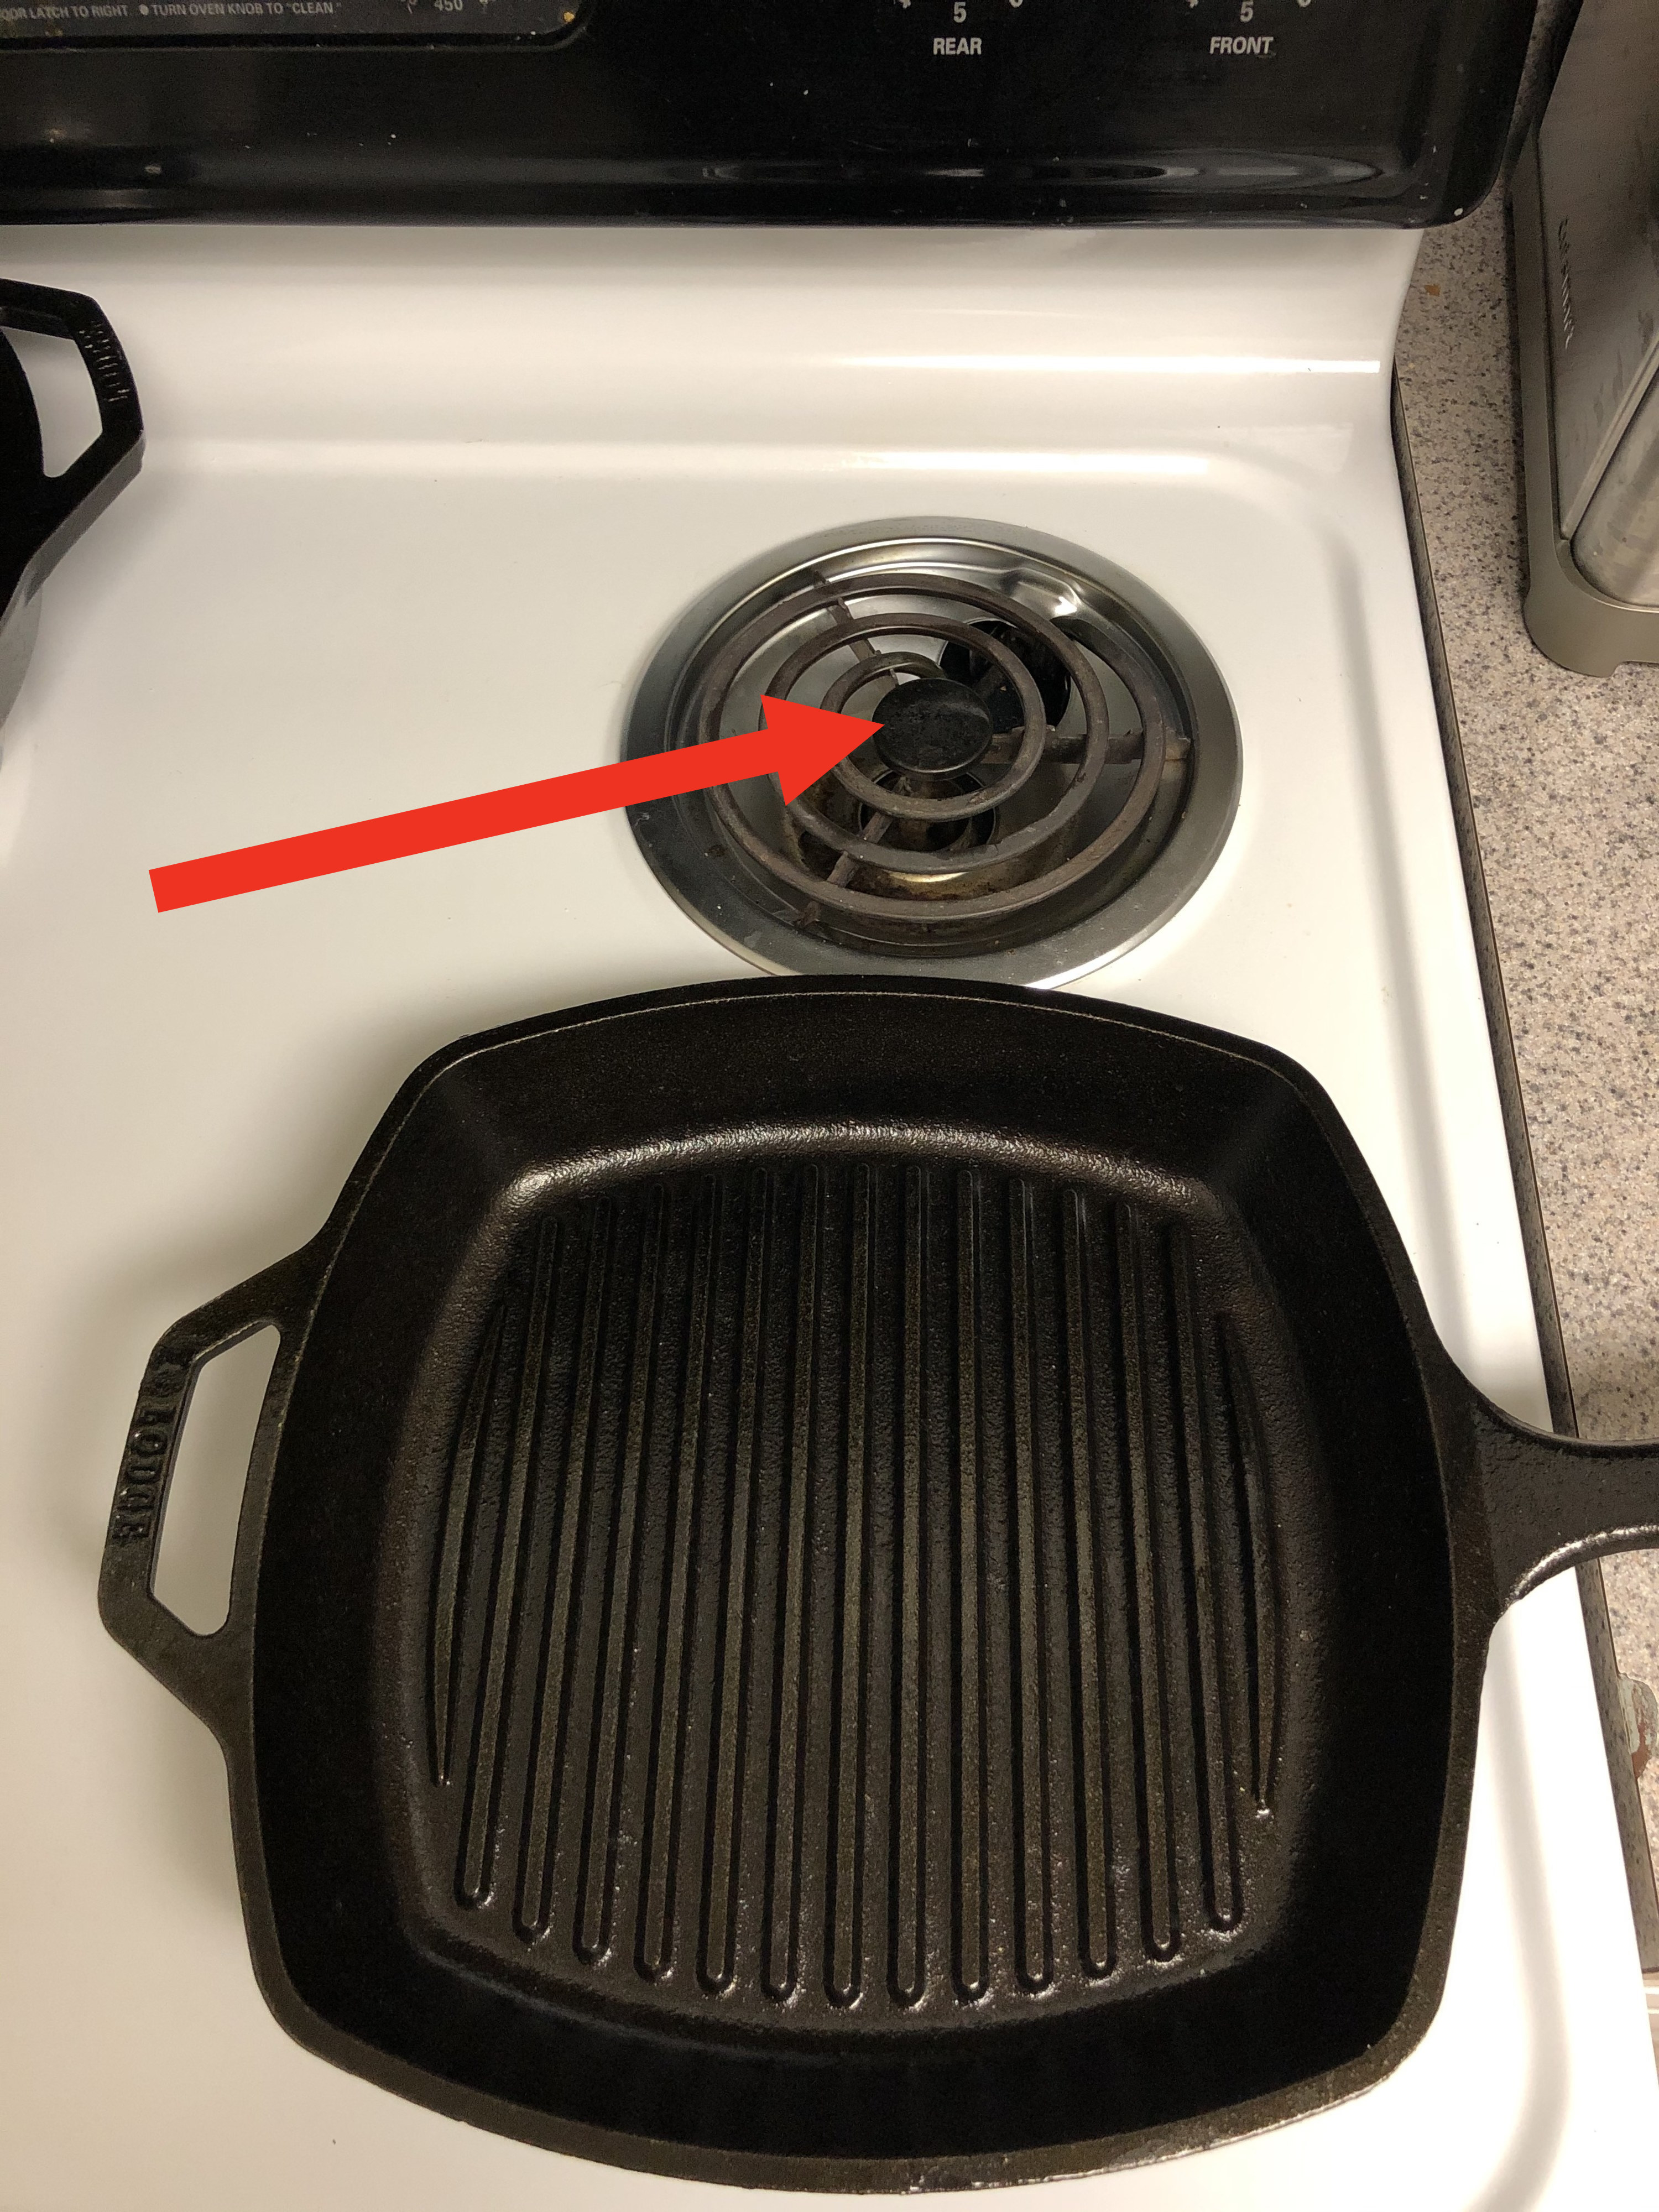 An overhead shot of an electric stove, with an arrow pointing at the back burner